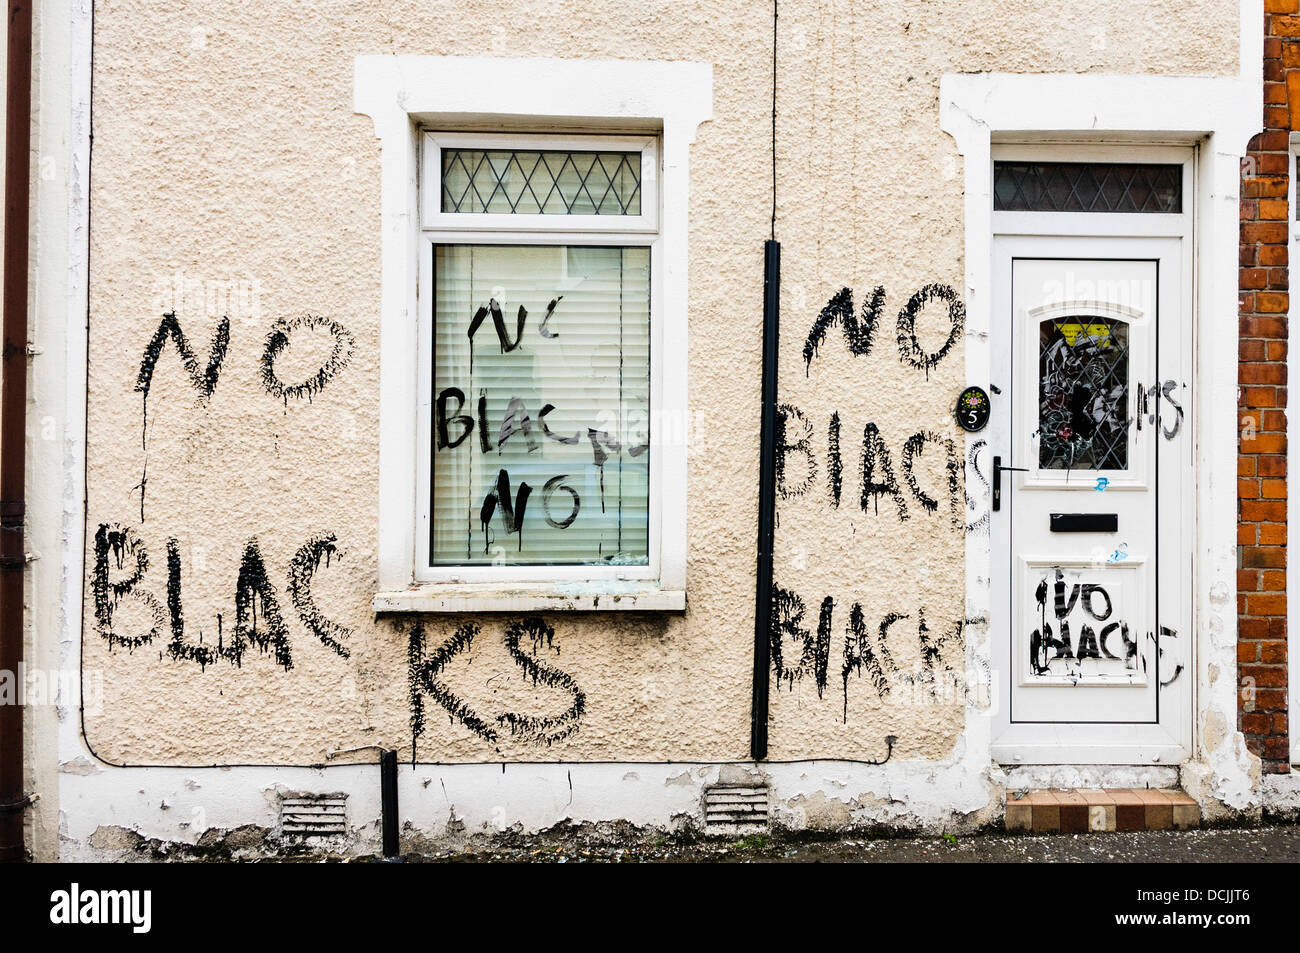 Belfast, Northern Ireland, UK. 19th August 2013 - Racist graffiti has been written on the walls and windows smashed, on a house recently occupied by two Nigerian men in Belfast. Credit:  Stephen Barnes/Alamy Live News Stock Photo